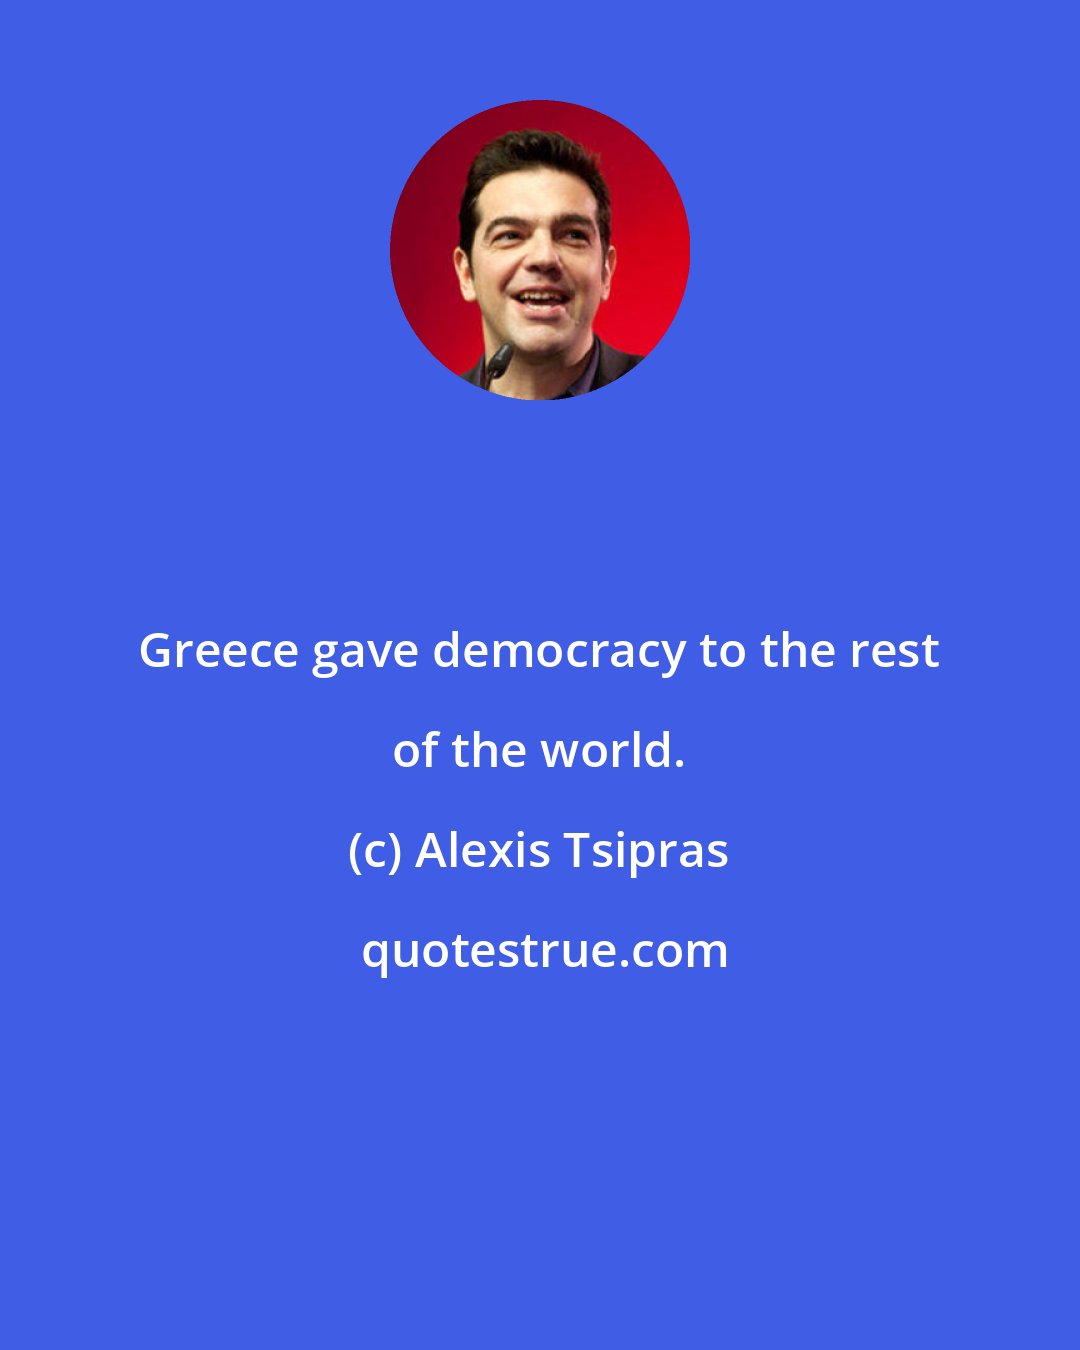 Alexis Tsipras: Greece gave democracy to the rest of the world.